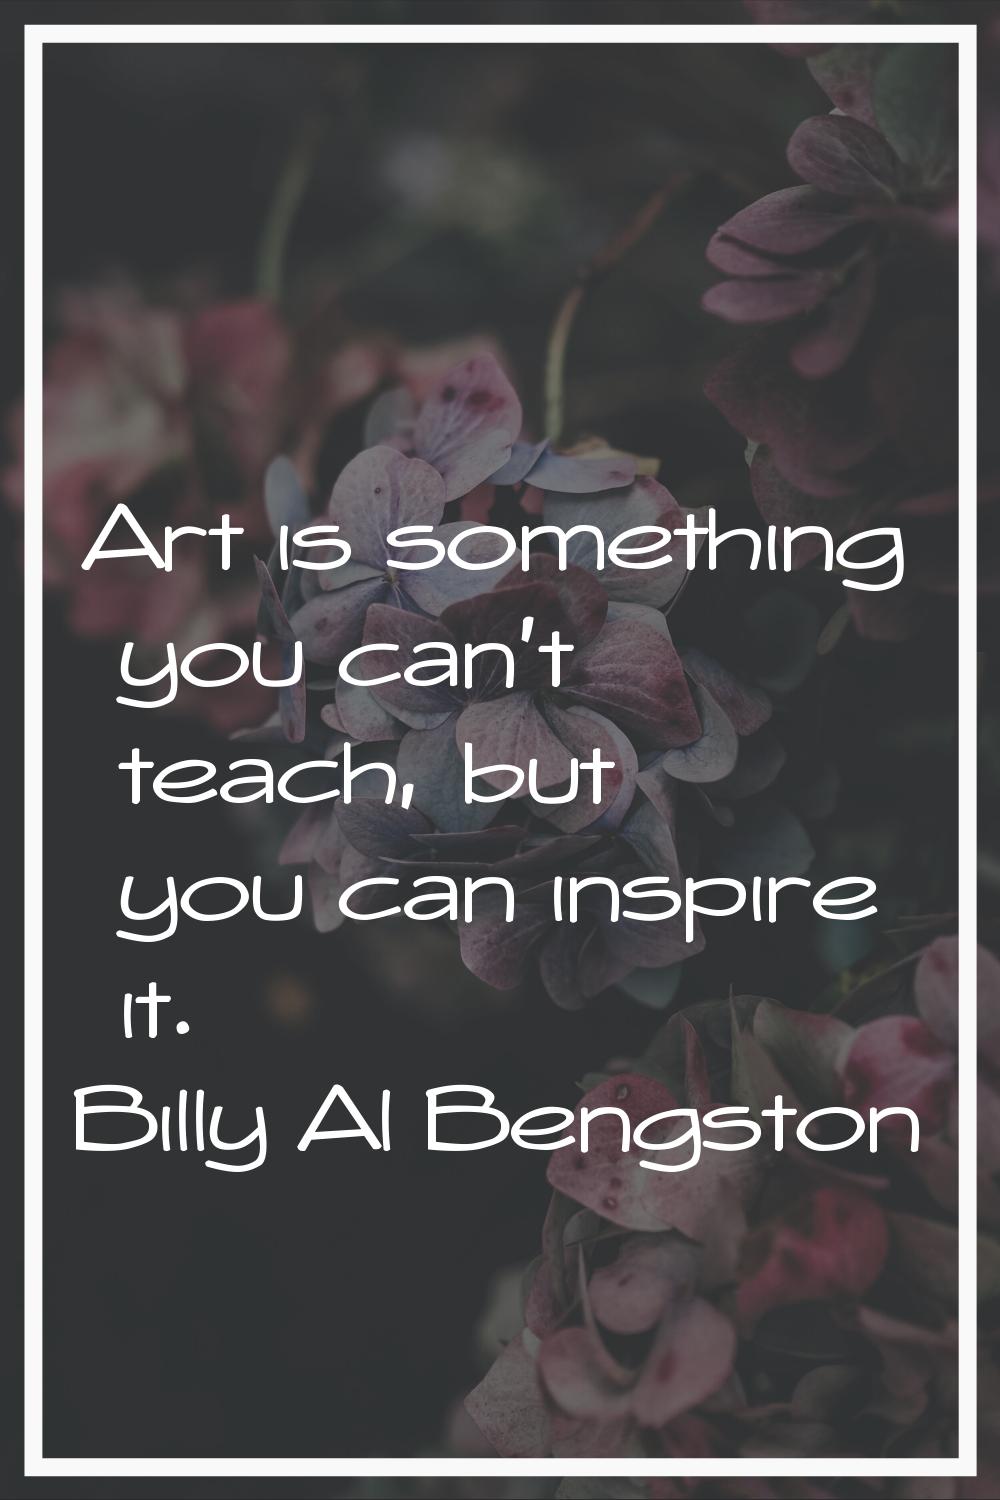 Art is something you can't teach, but you can inspire it.